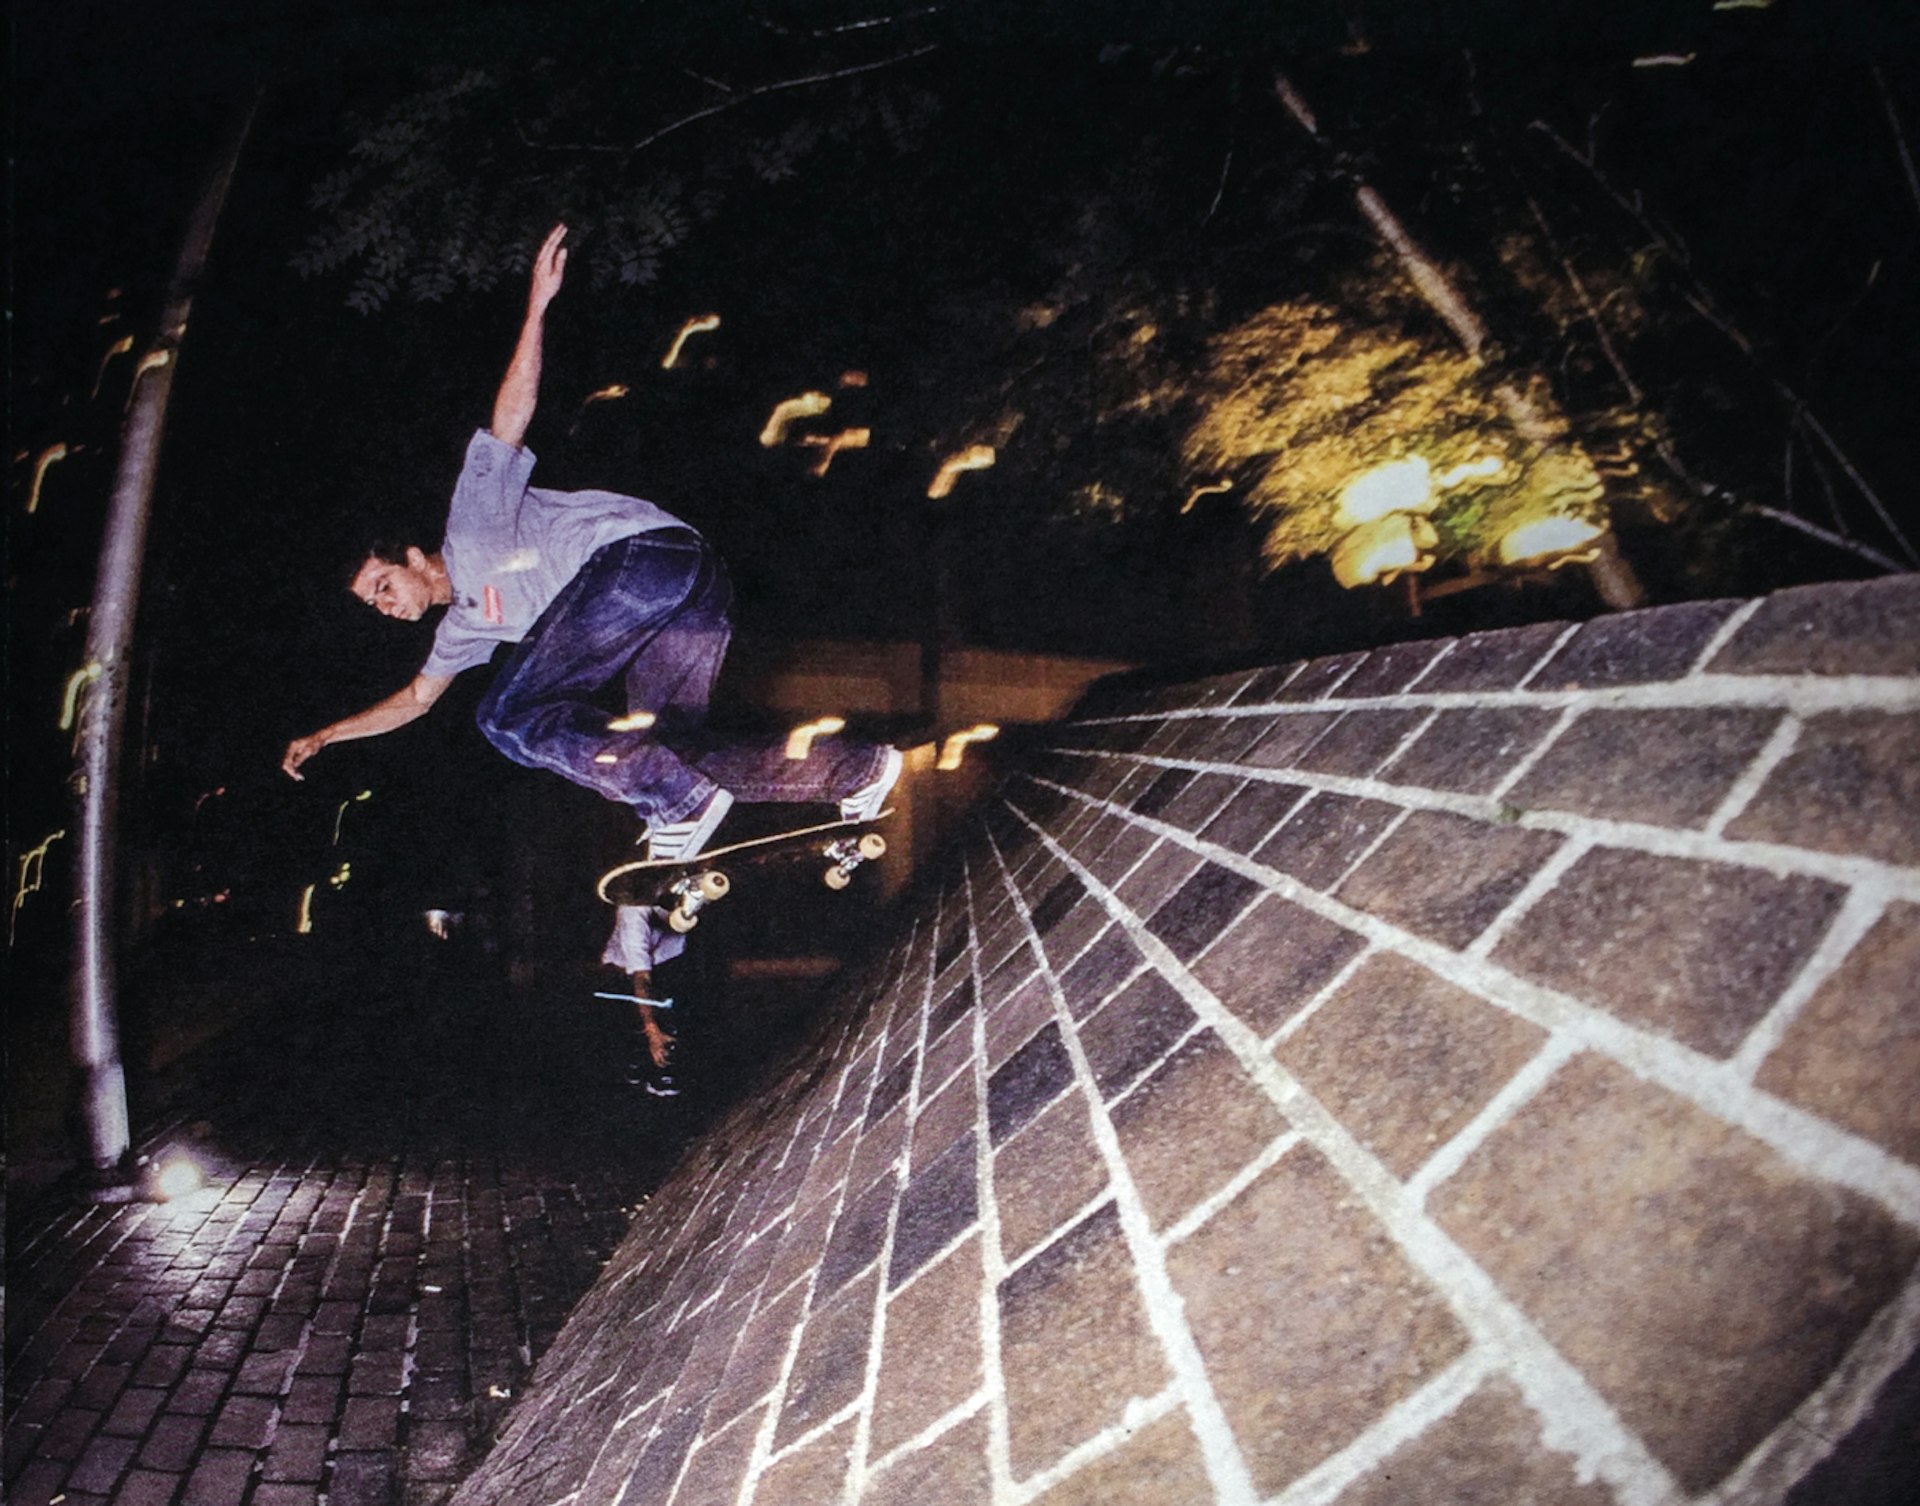 The 90s skate video that changed the face of counterculture